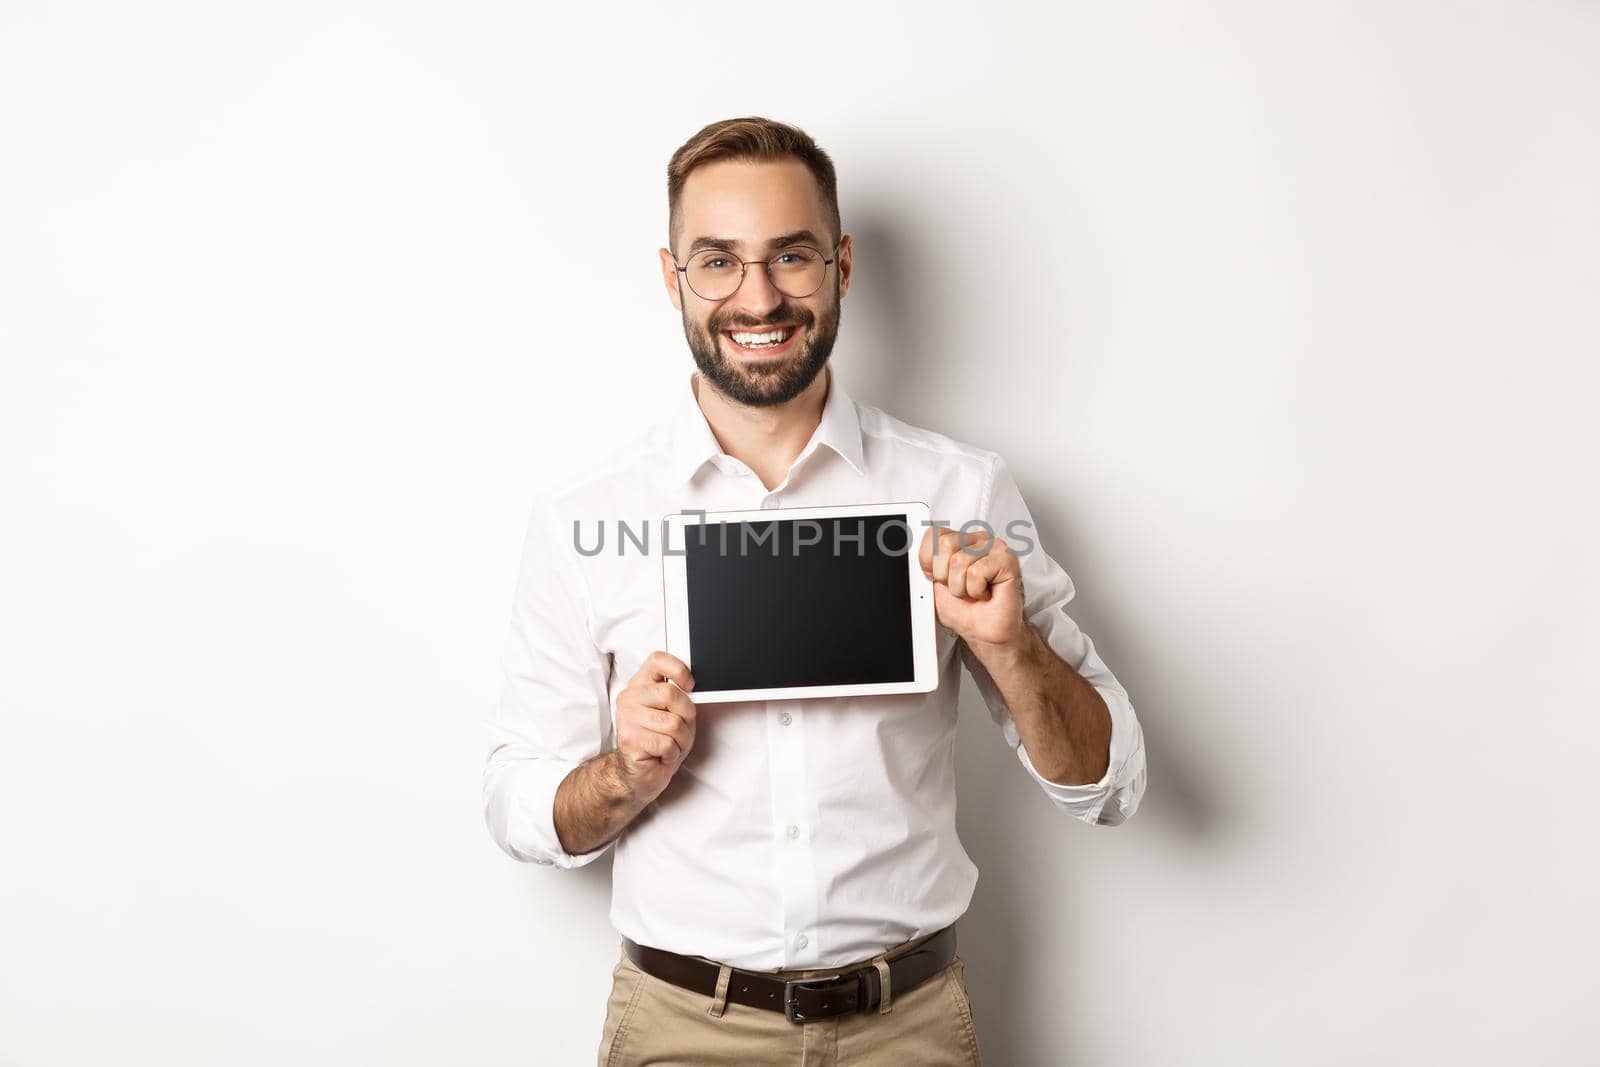 Shopping and technology. Handsome man showing digital tablet screen, wearing glasses with white collar shirt, studio background.